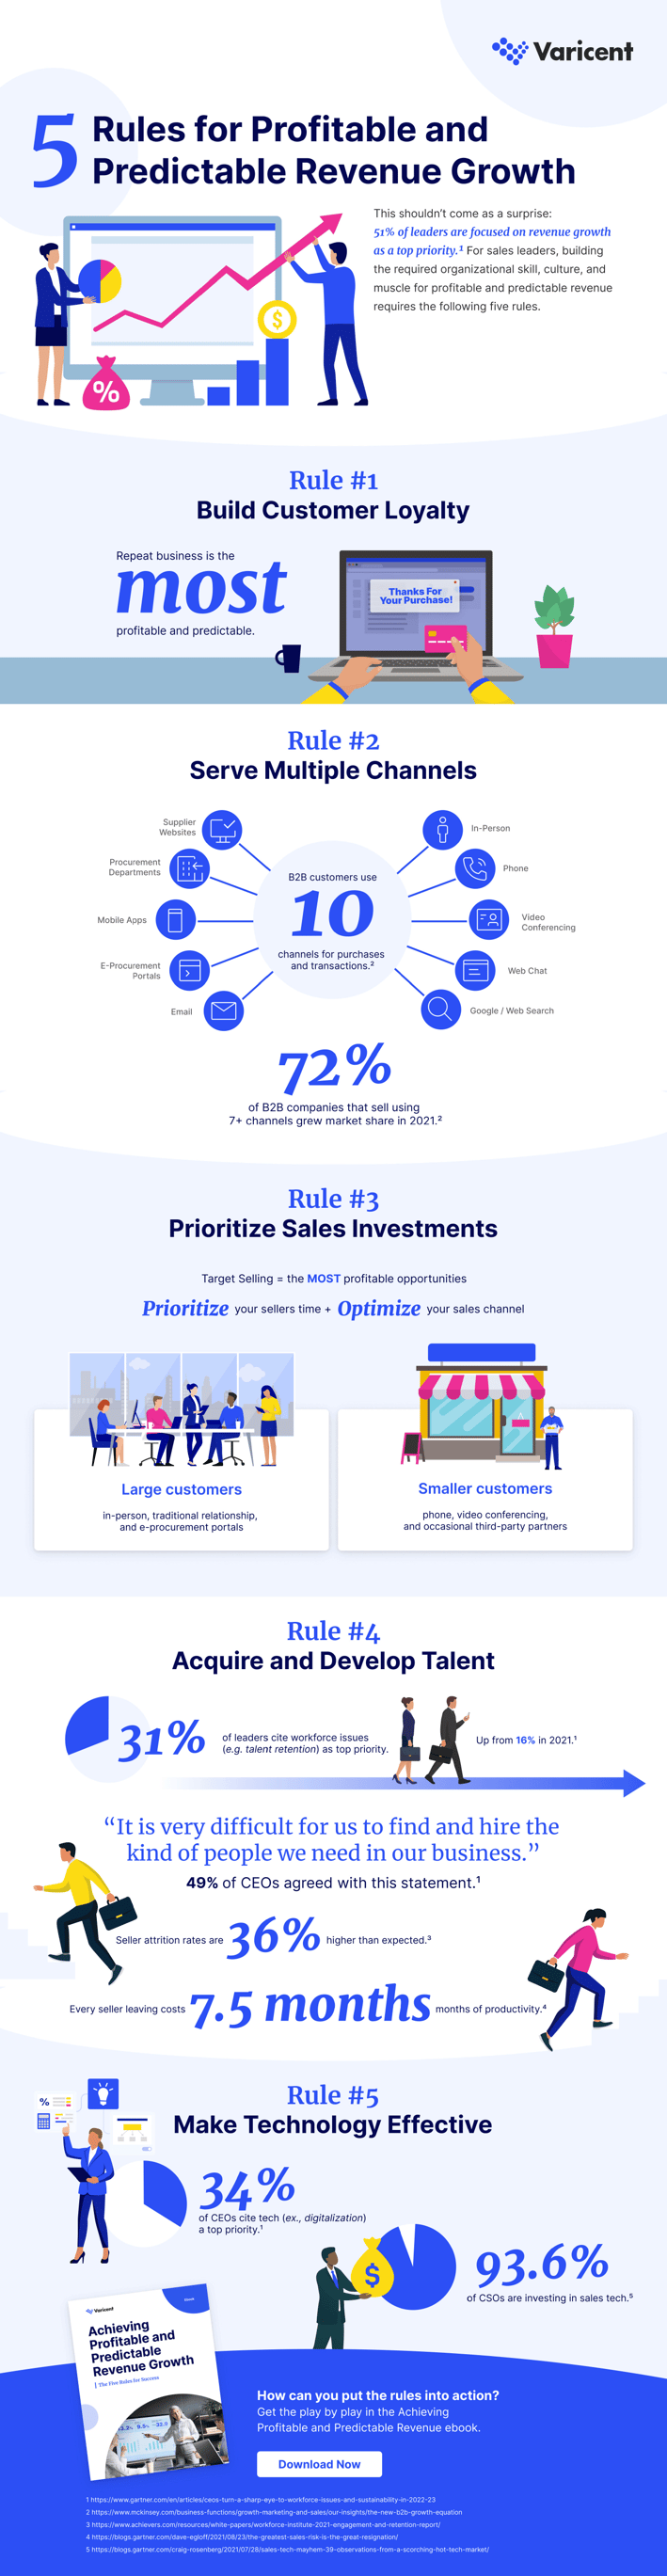 5-Rules-For-Profitable-And-Predictable-Revenue-Growth-infograhics